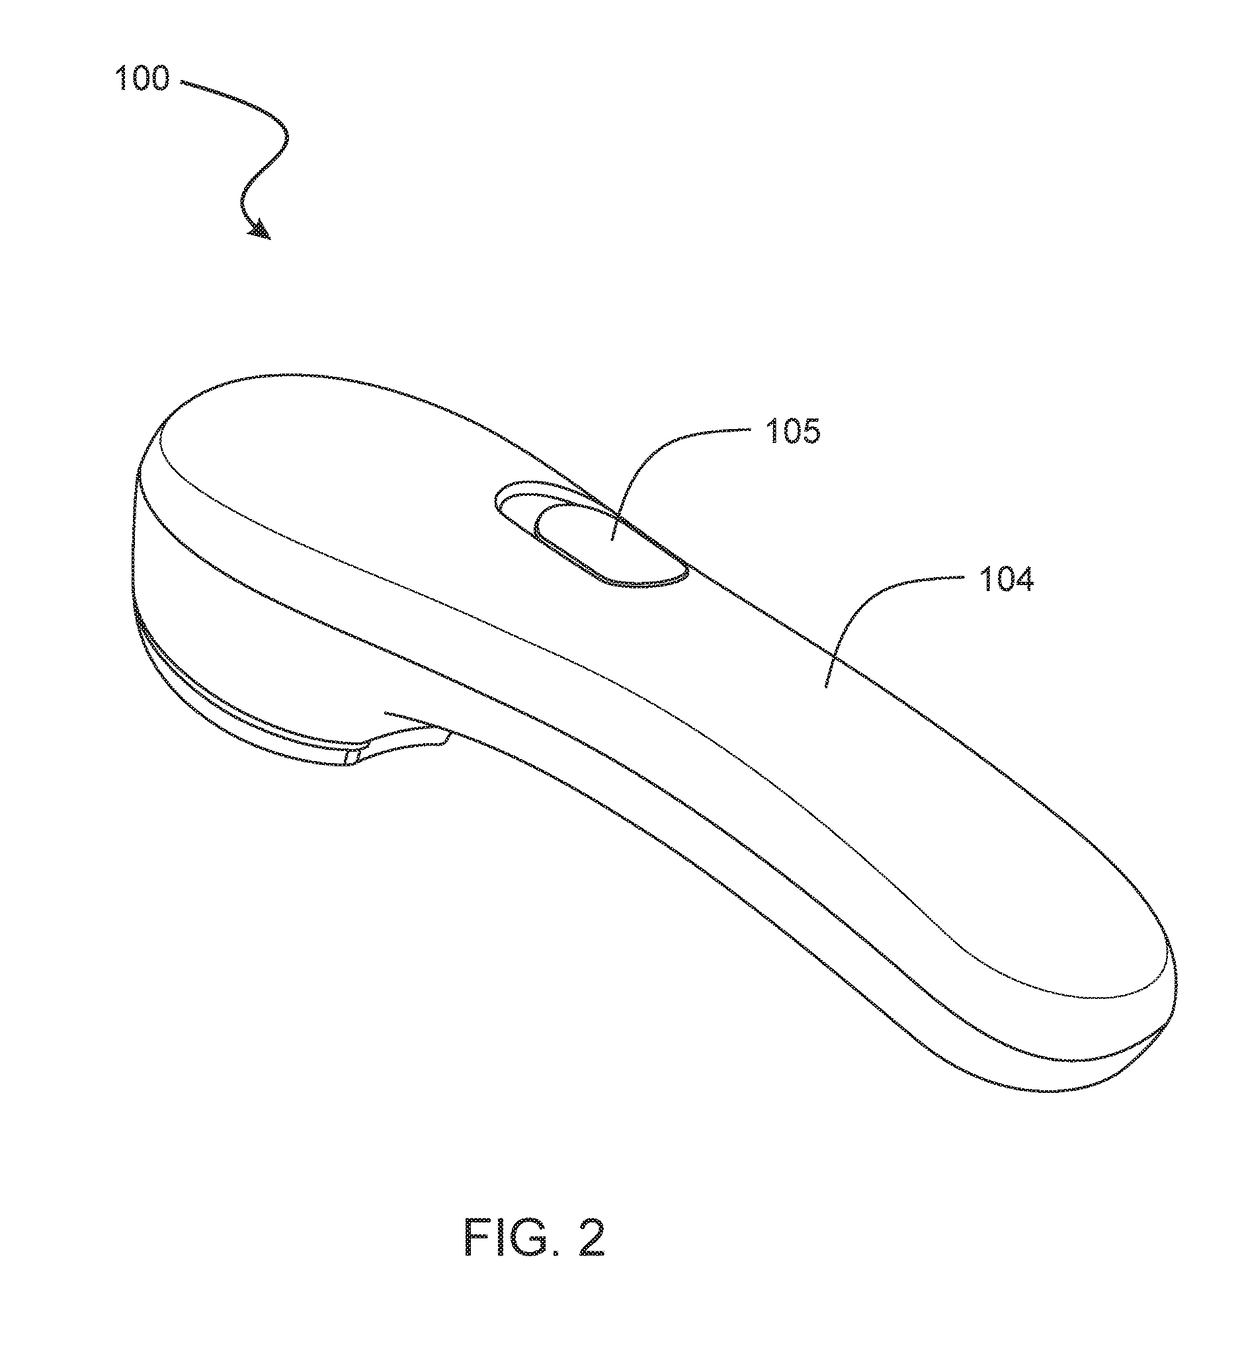 Application of topical product using a sonic device